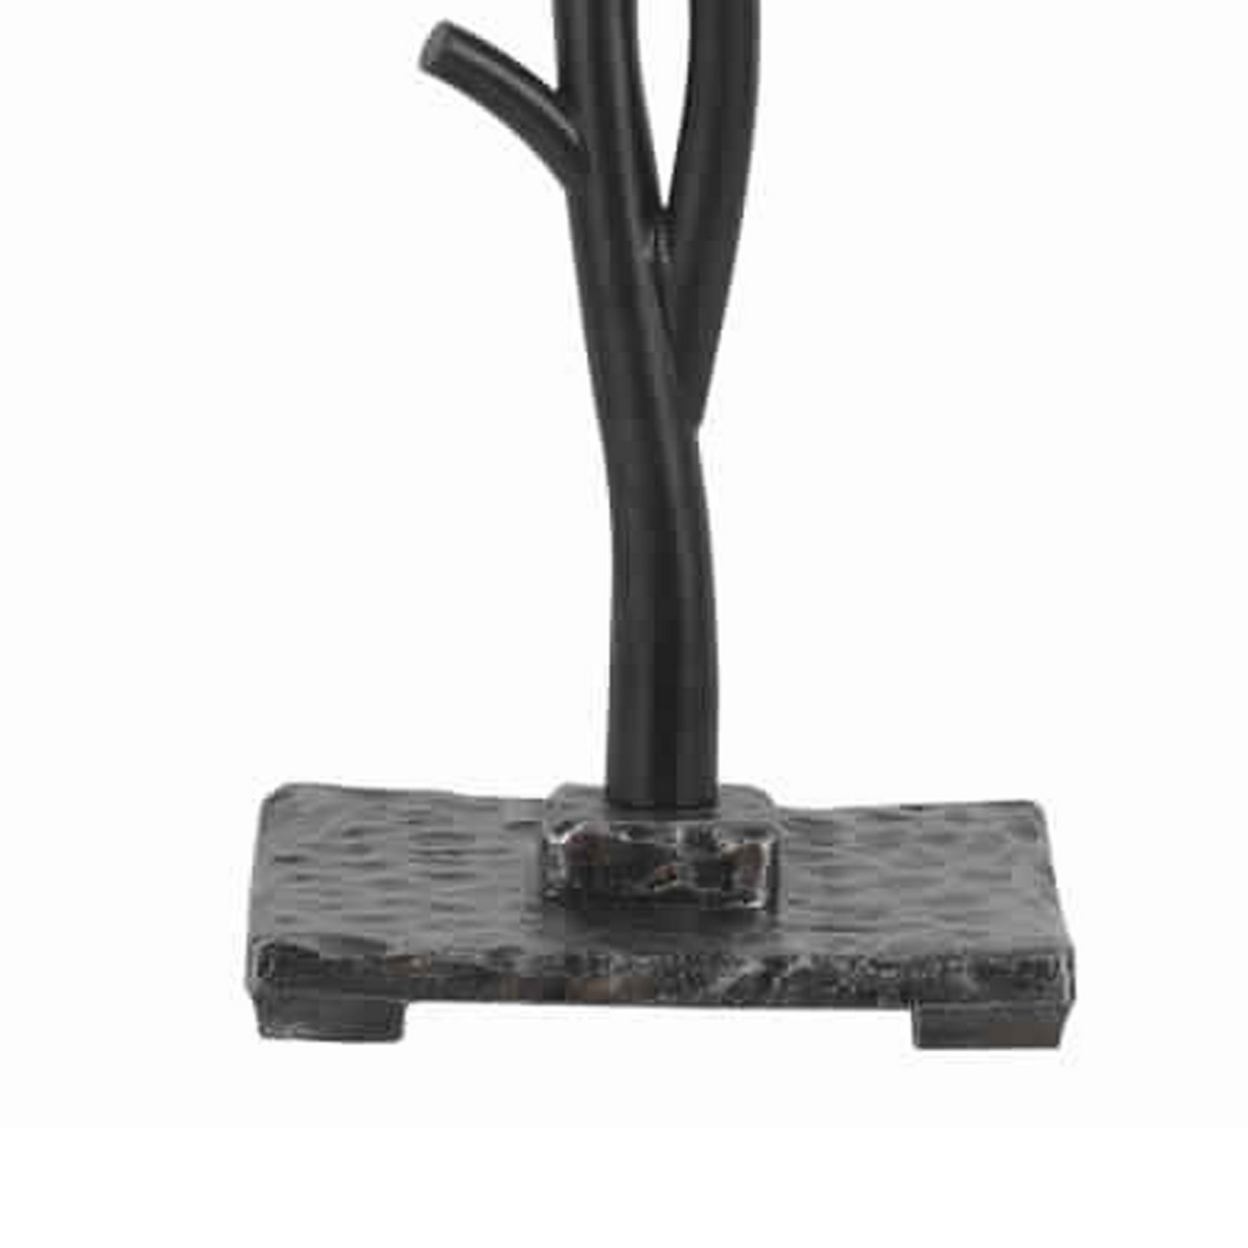 Metal Tree And Bird Body Table Lamp With Tapered Shade, Black And Beige- Saltoro Sherpi